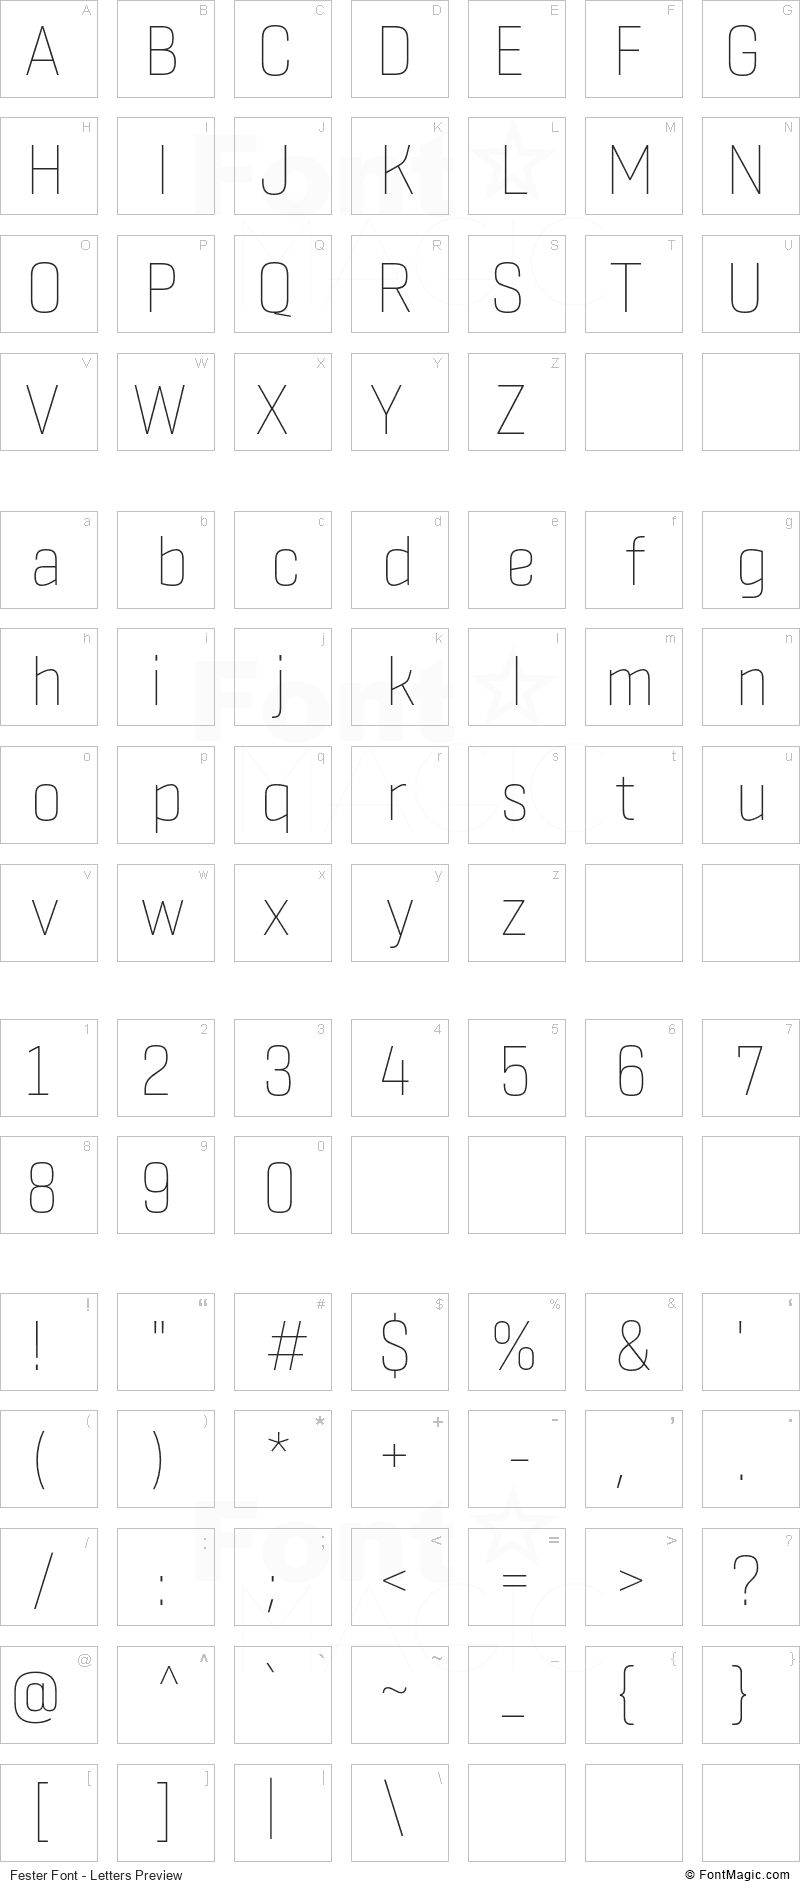 Fester Font - All Latters Preview Chart